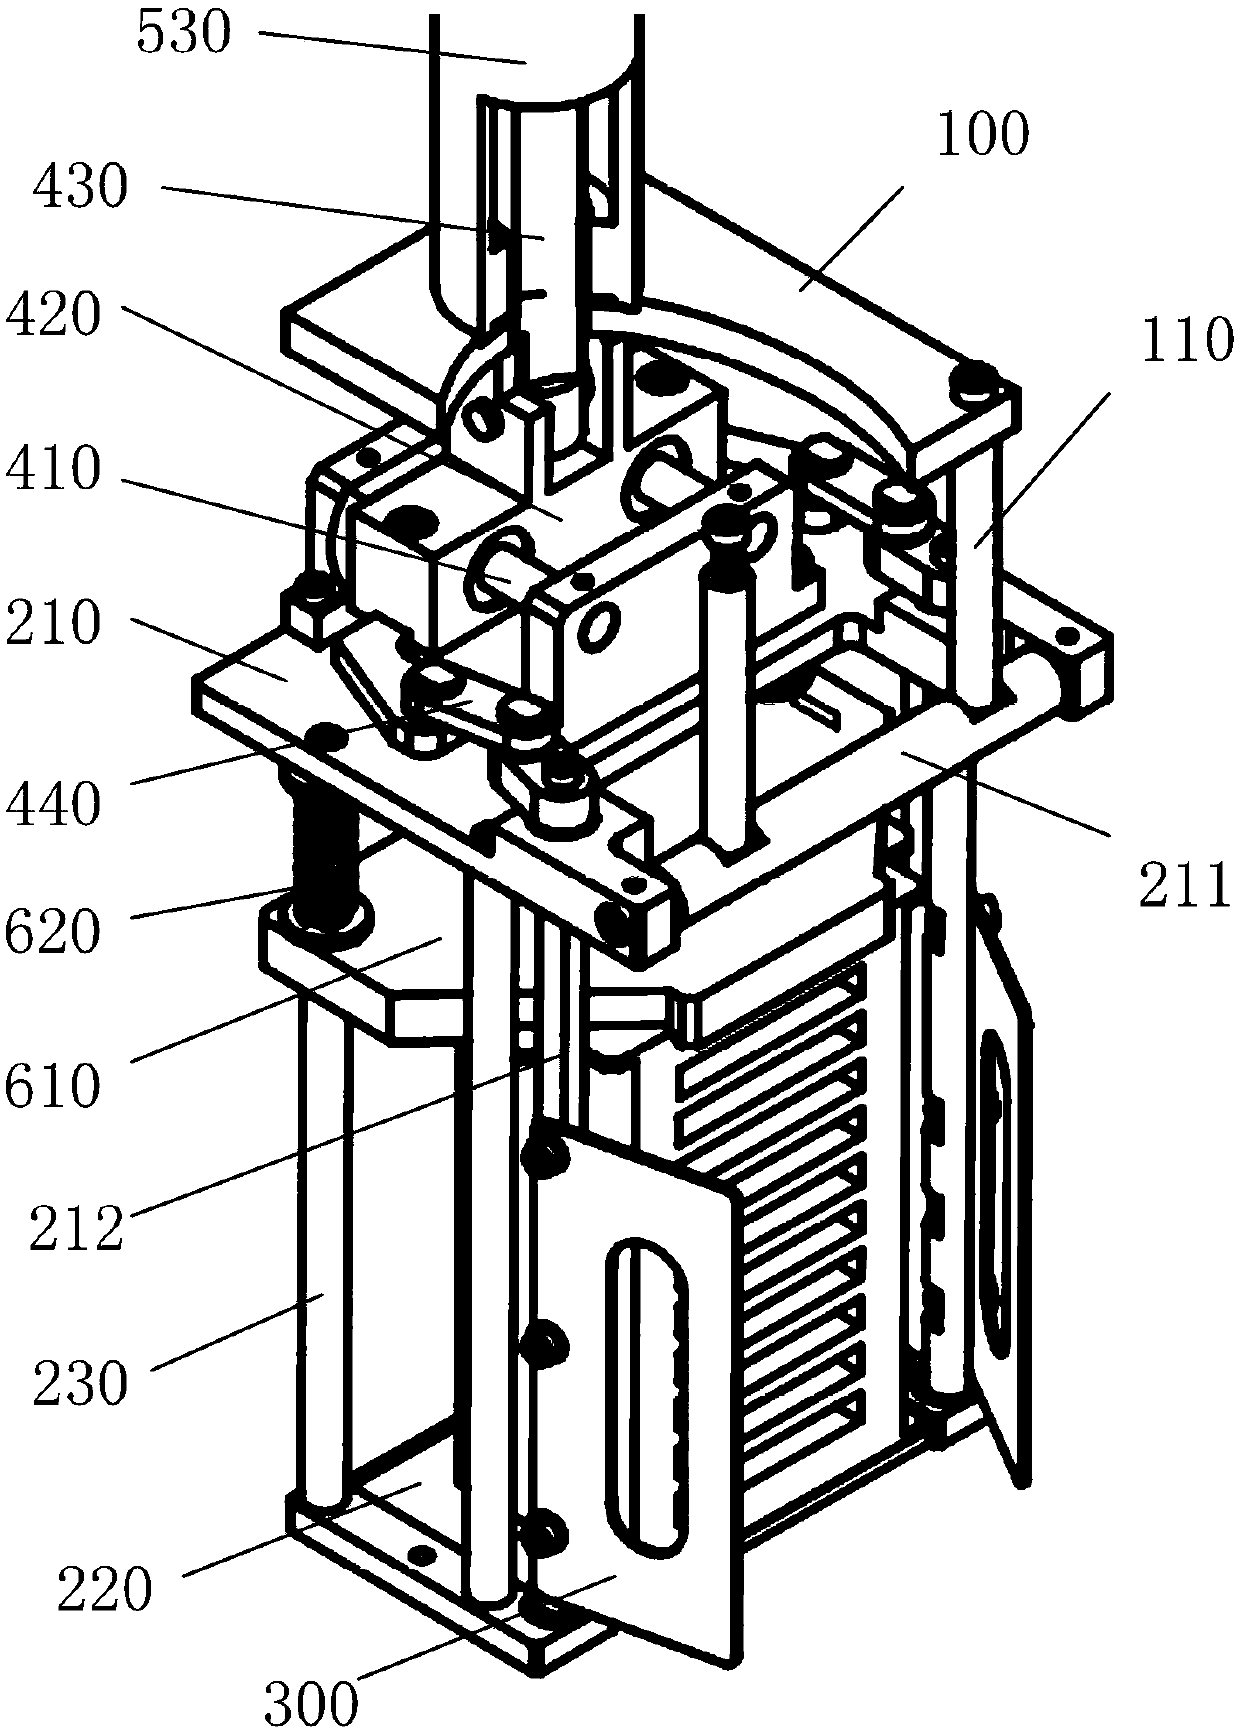 Chip box taking and placing mechanism and shaking device of semiconductor wet process soaking tank